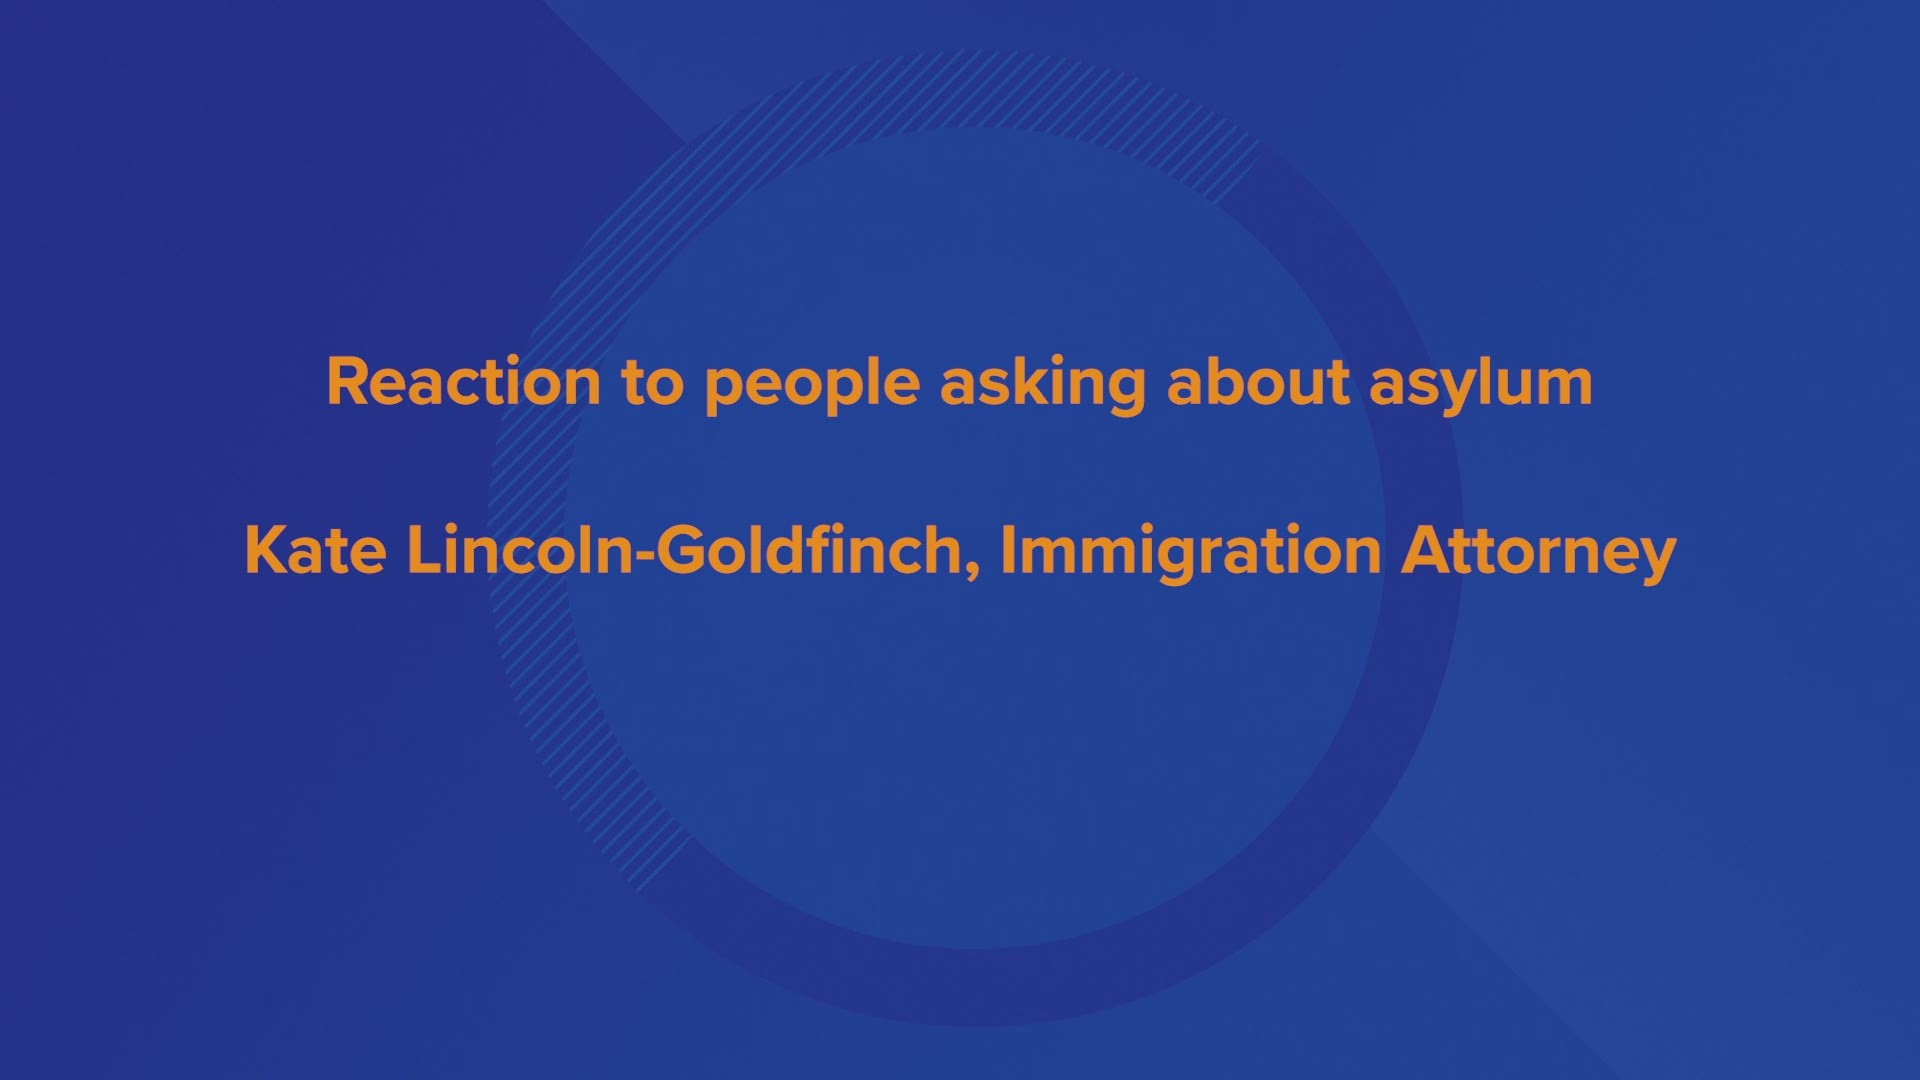 Kate Lincoln-Goldfinch, immigration attorney, says people should be asked if they have a credible fear of returning back to their home country before they ever face a judge, even for criminal charges.